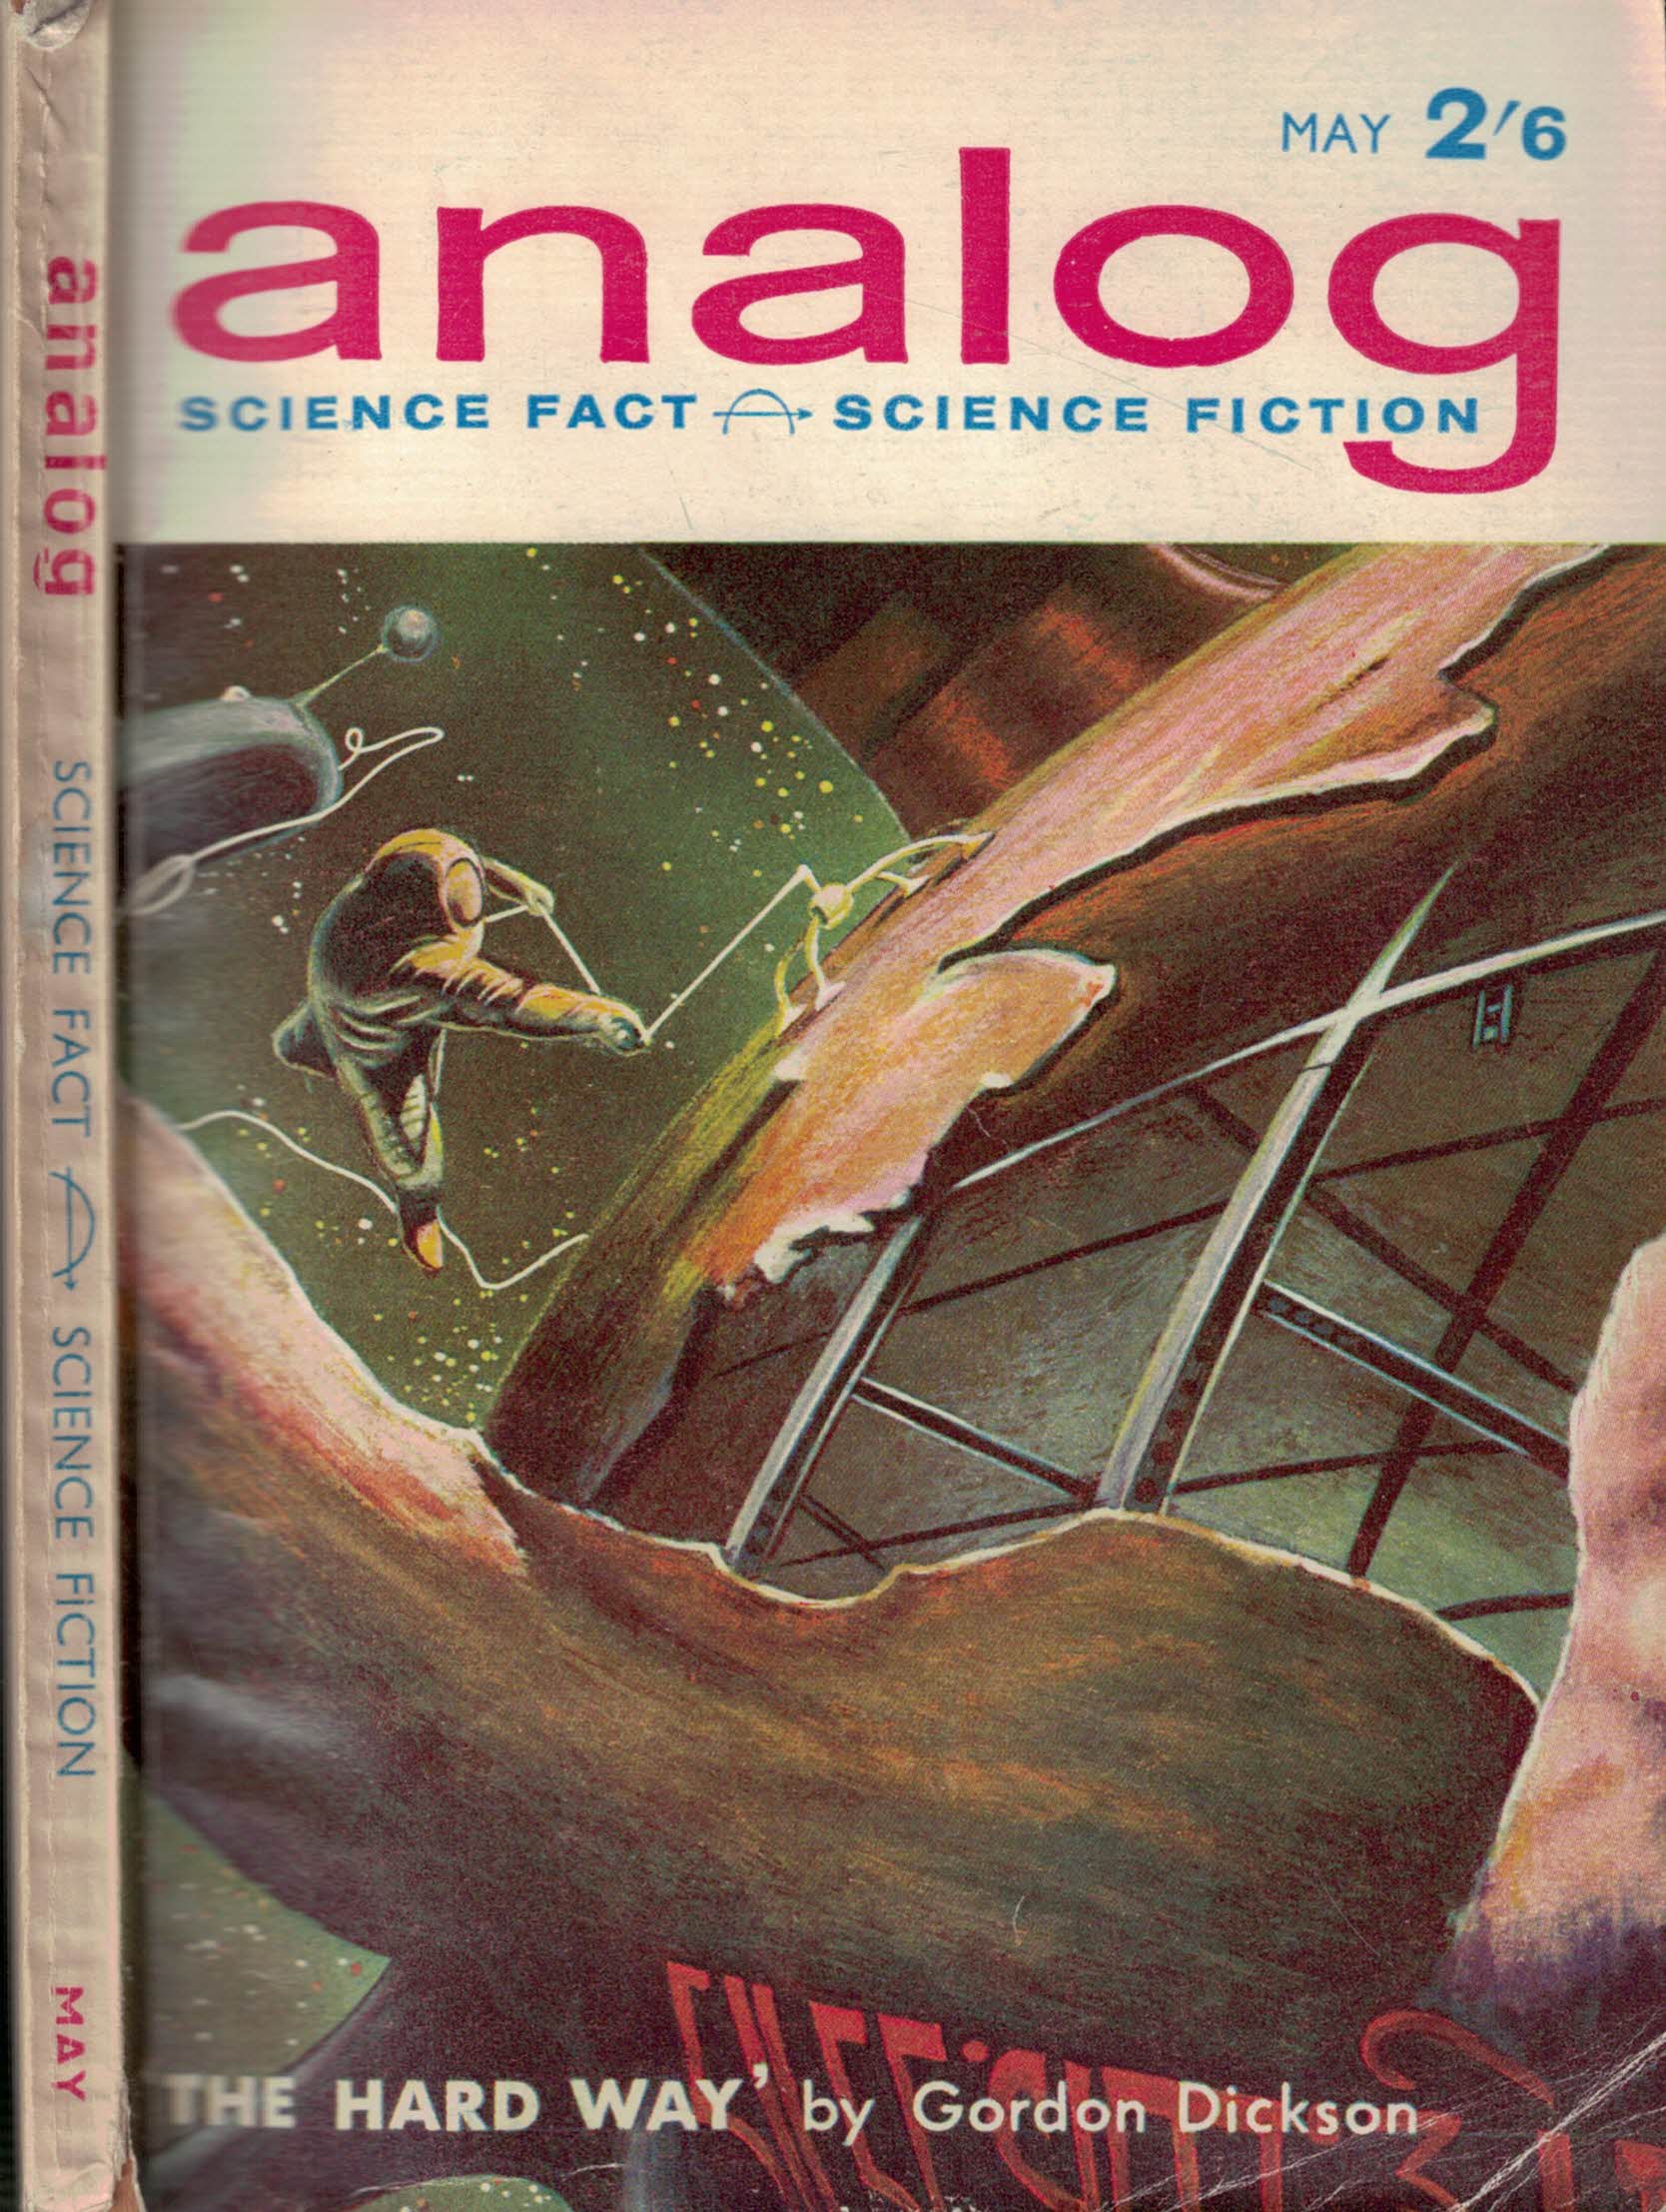 Analog. Science Fiction and Fact. Volume 19, Number 5. May 1963. British edition.